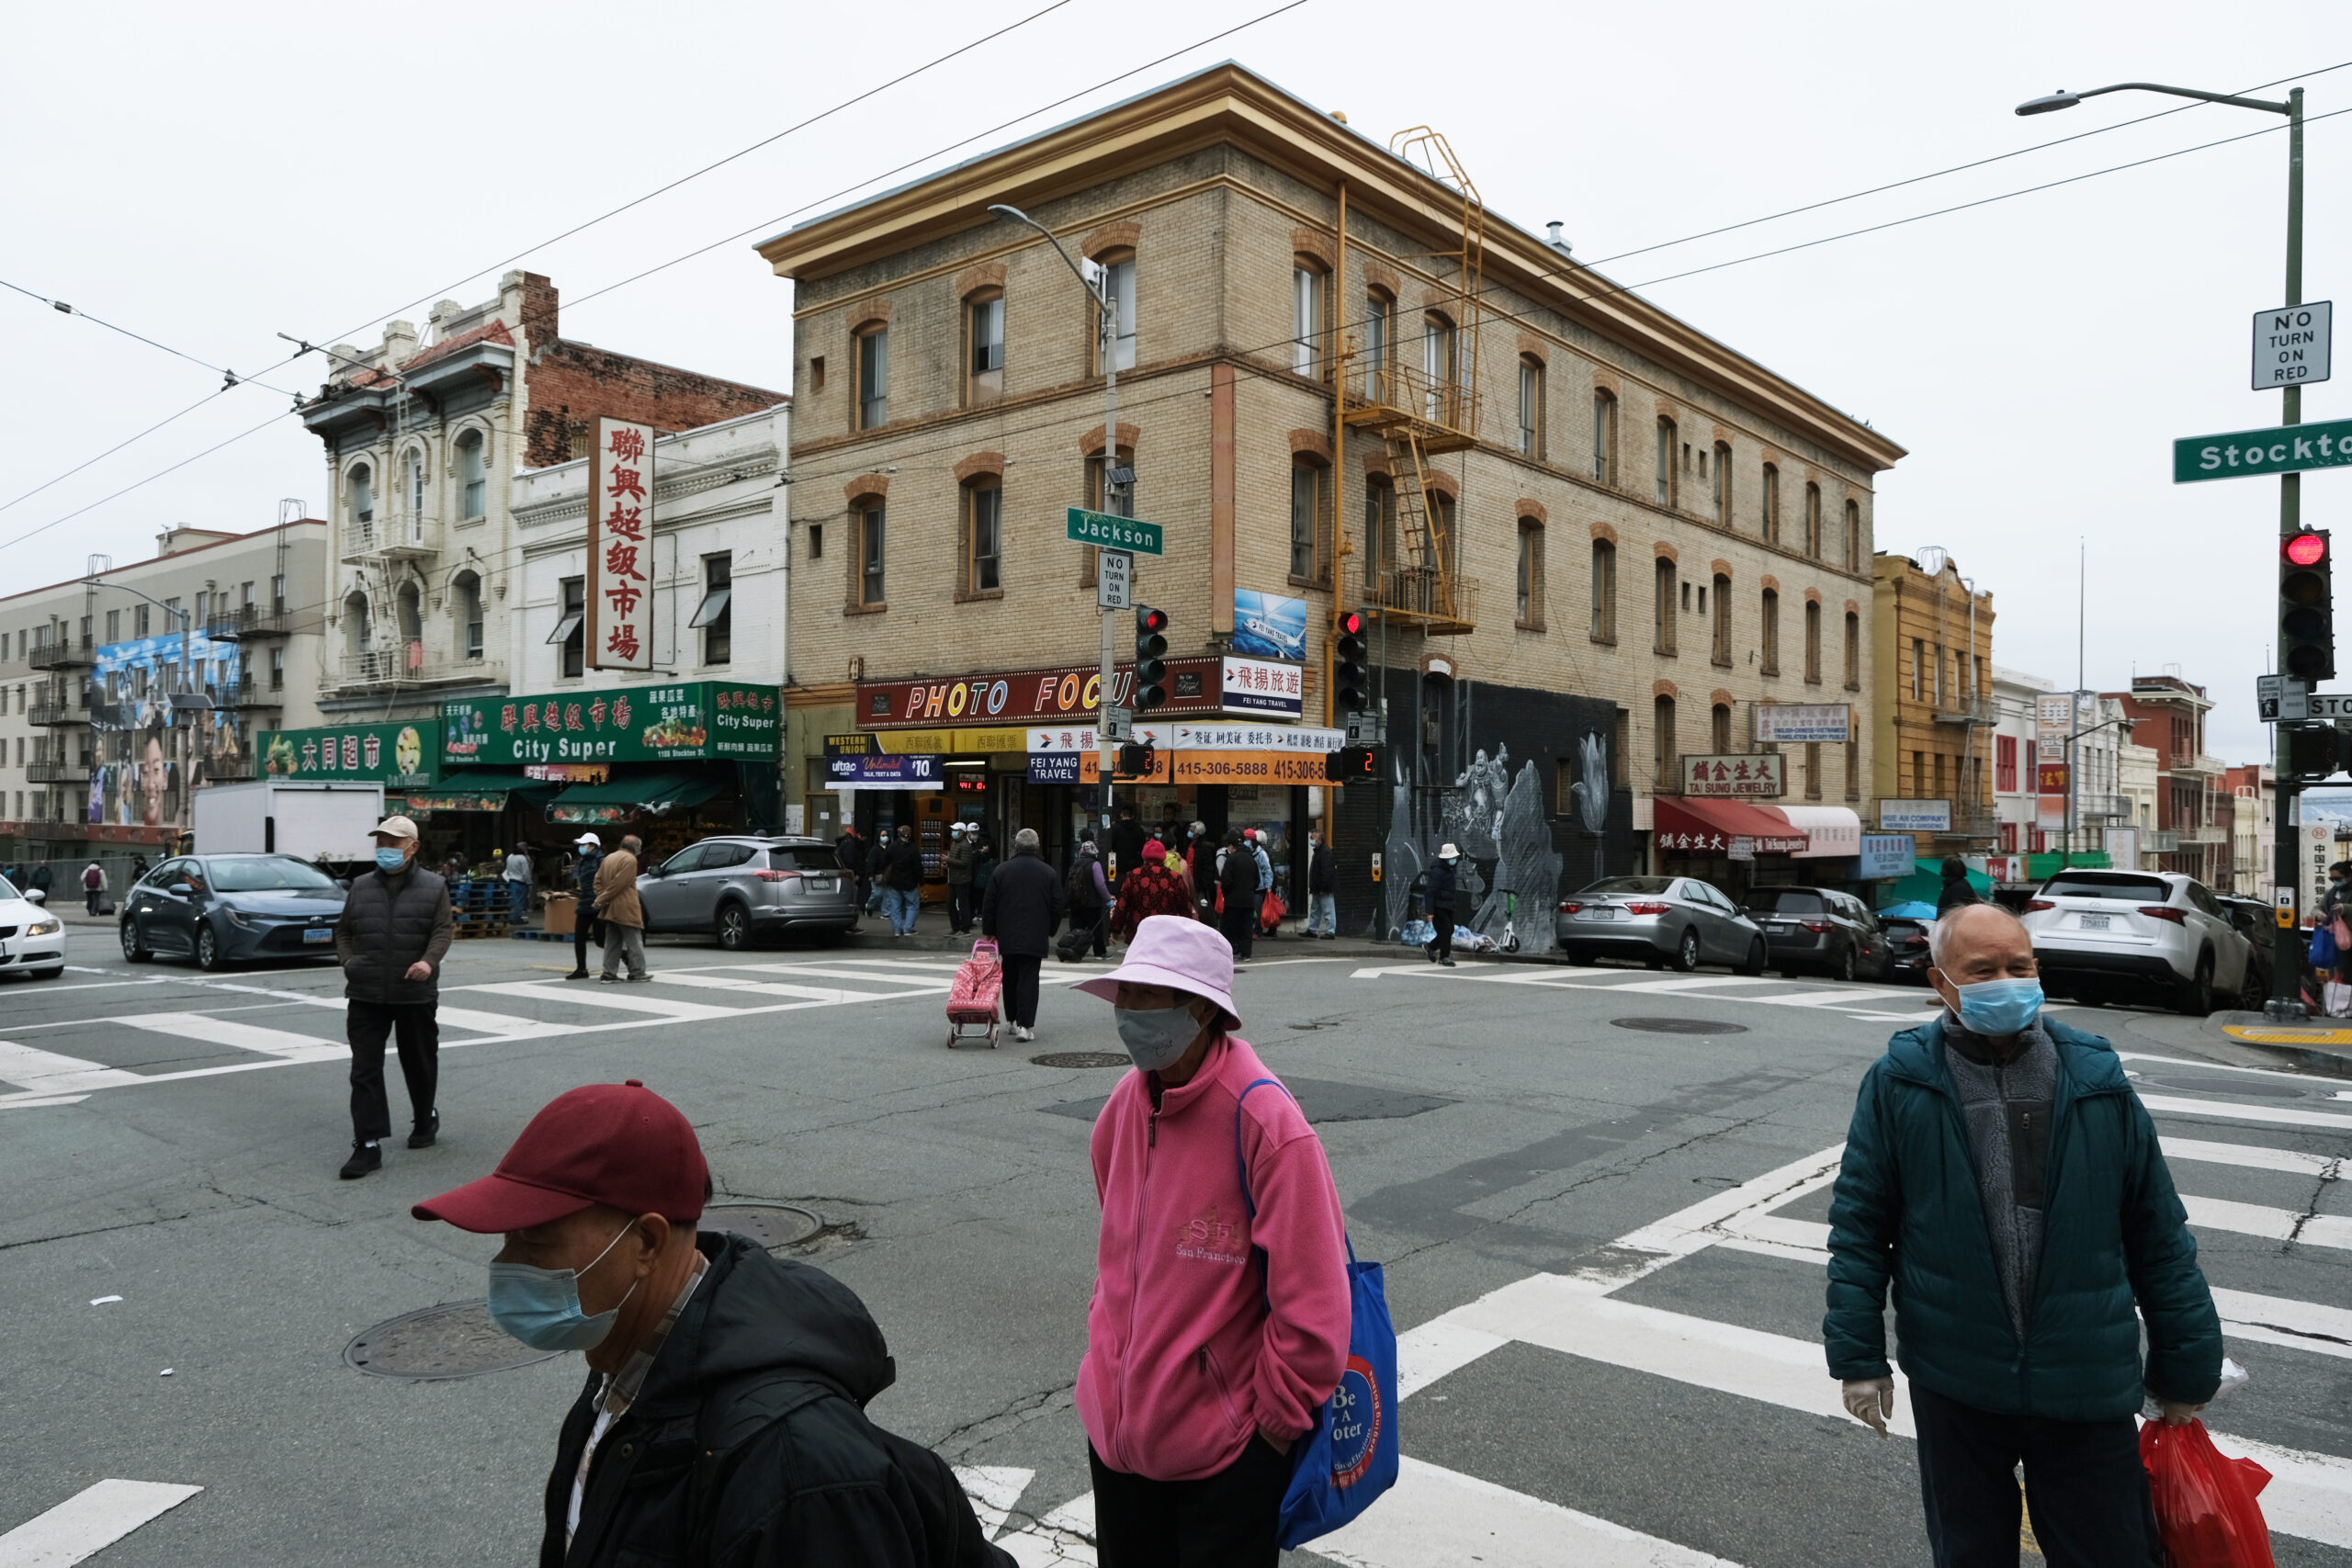 San Francisco Lost a Greater Percentage of Residents Than Any Other Large U.S. City